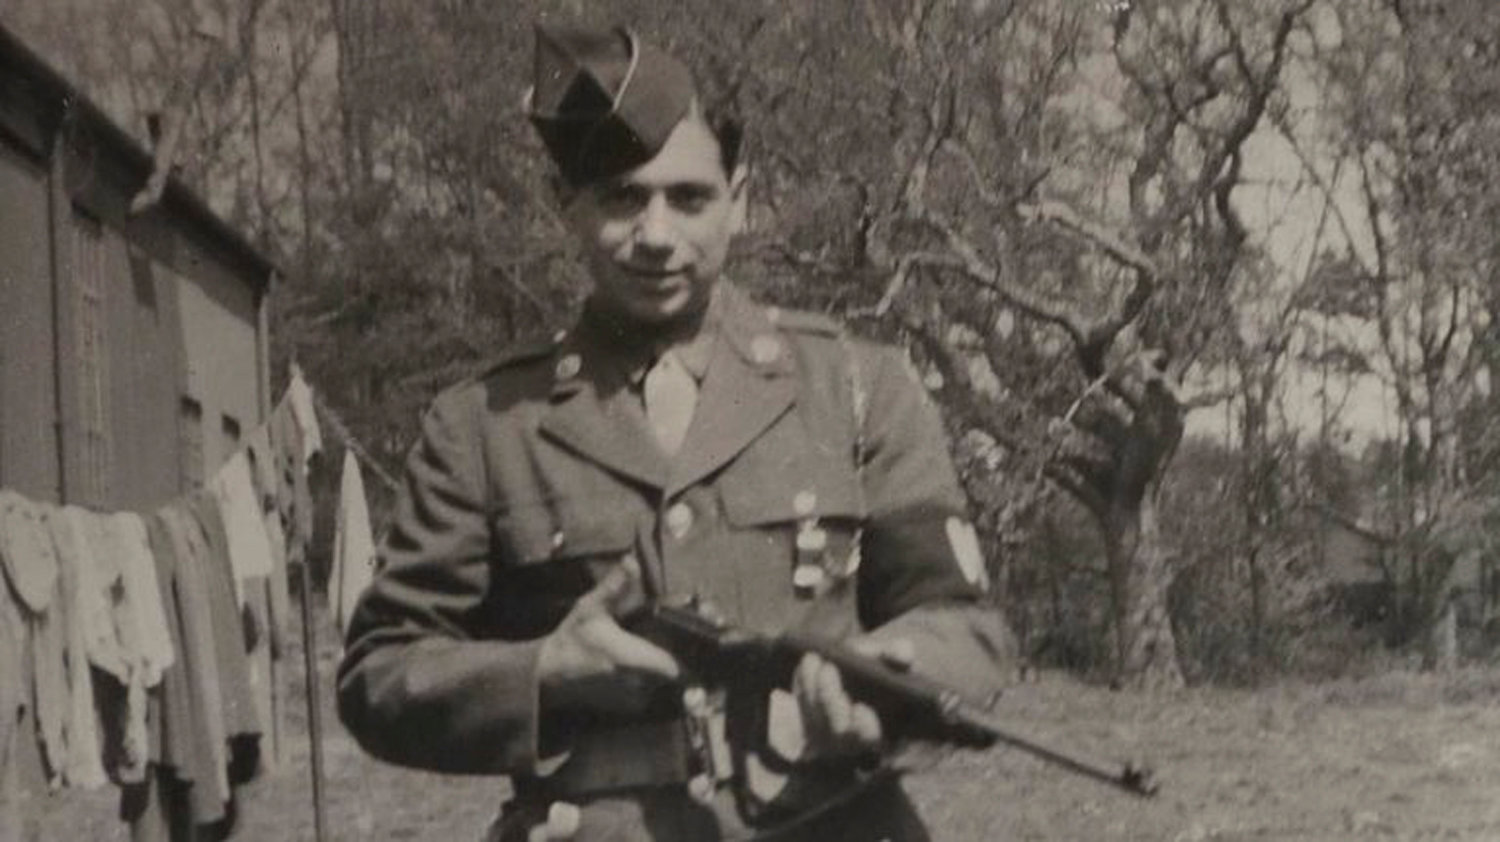 Jacob Cutler in an undated photo. He too was on the beaches of Normandy during the opening hours of the invasion to liberate France from Germany.